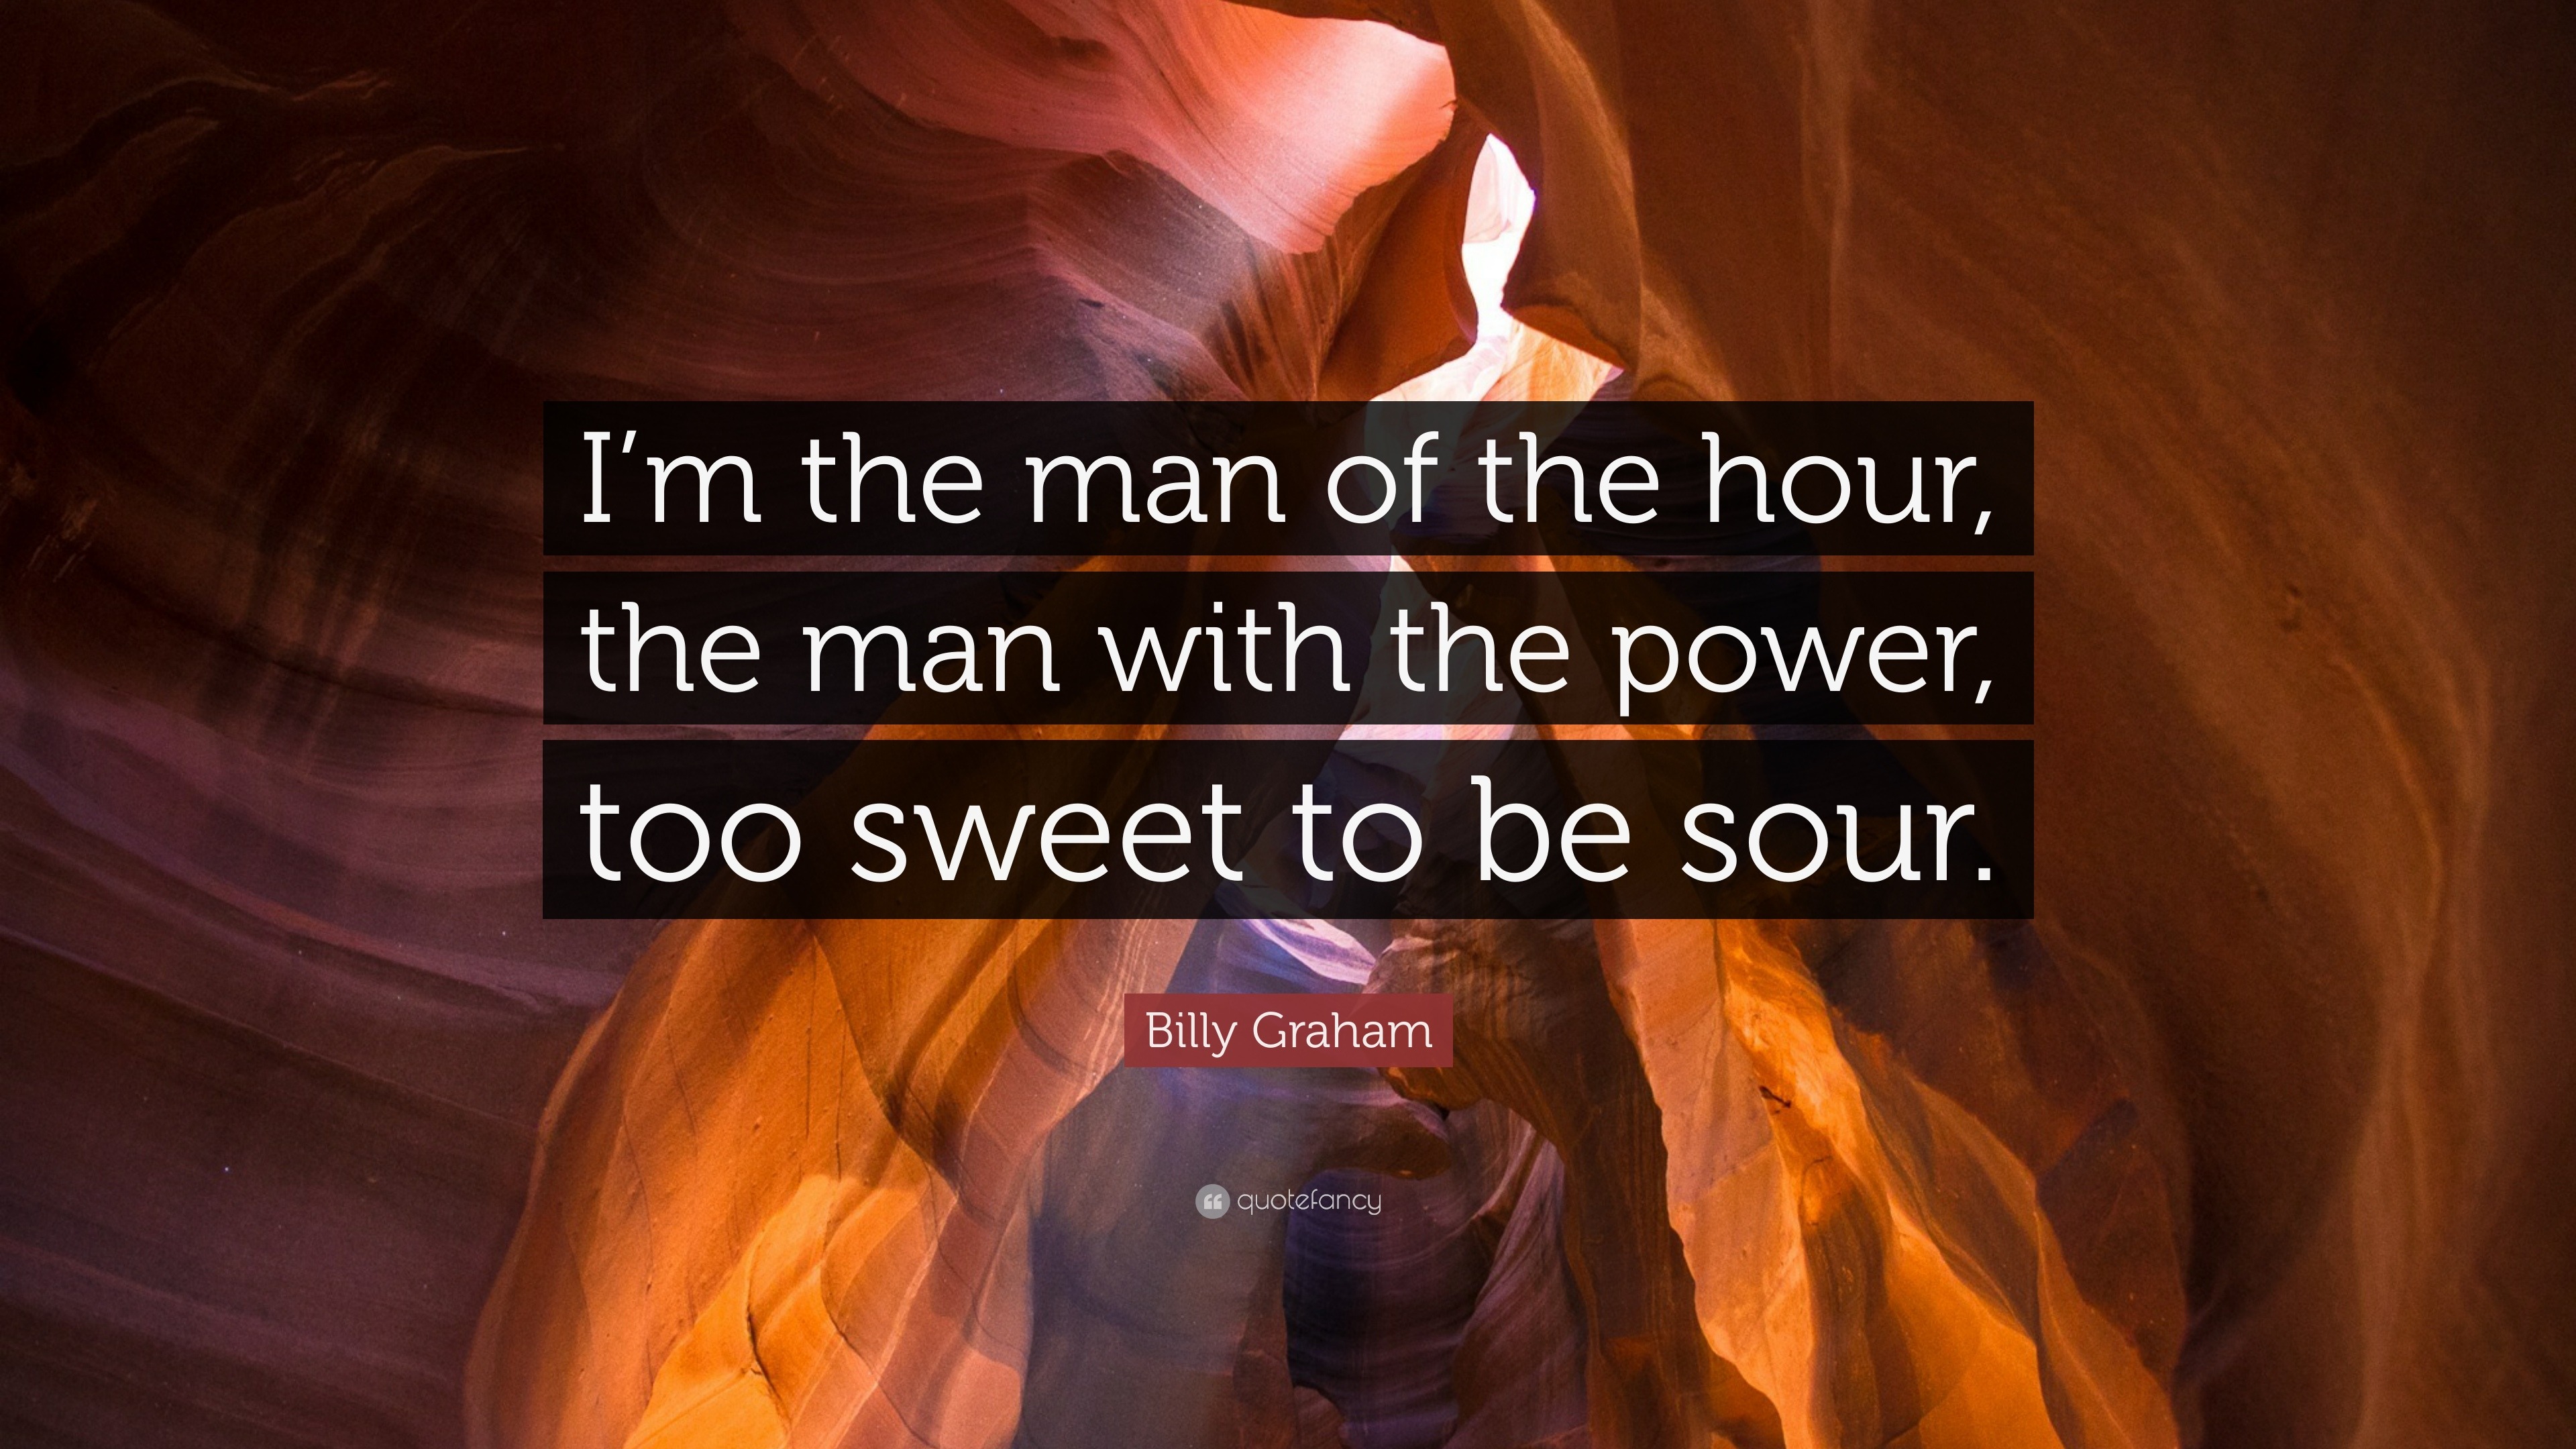 Billy Graham Quote: “I'm the man of the hour, the man with the power, too